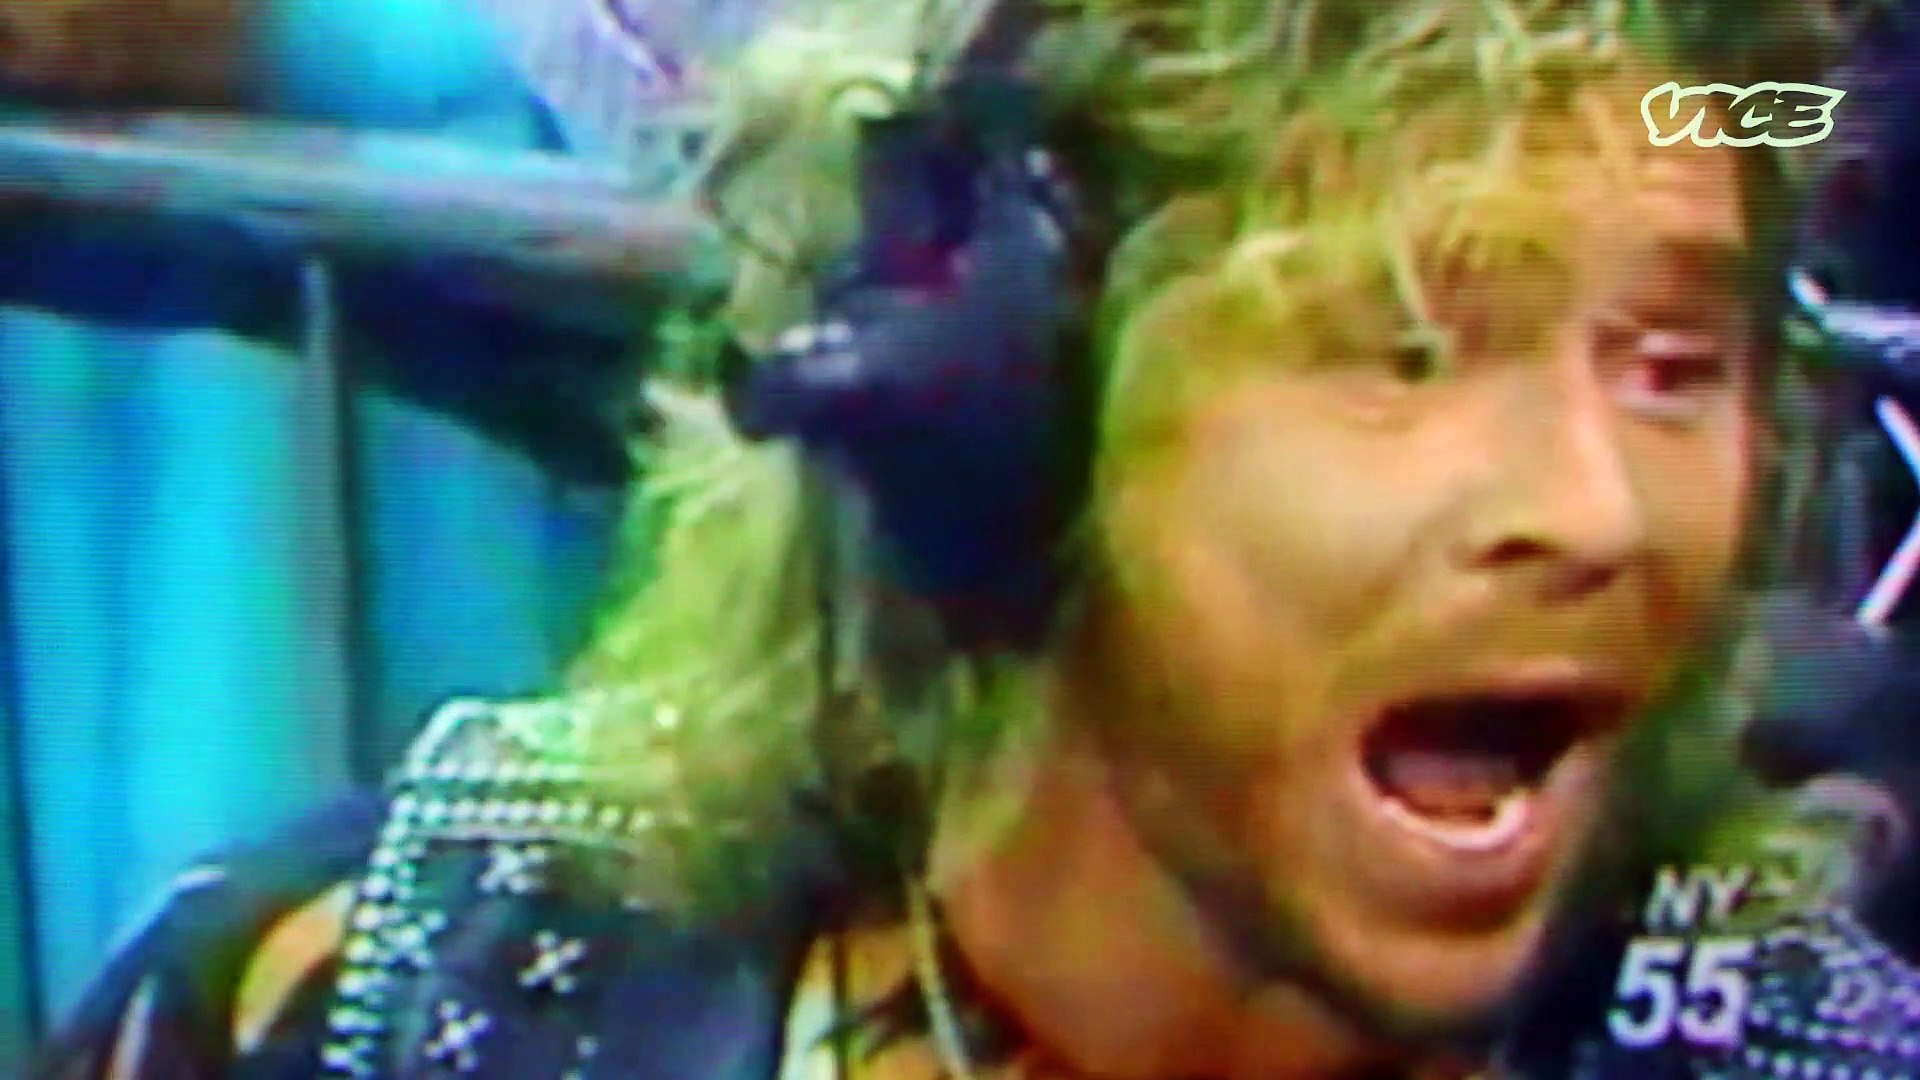 411's Dark Side of The Ring Report: 'How Brian Pillman Broke